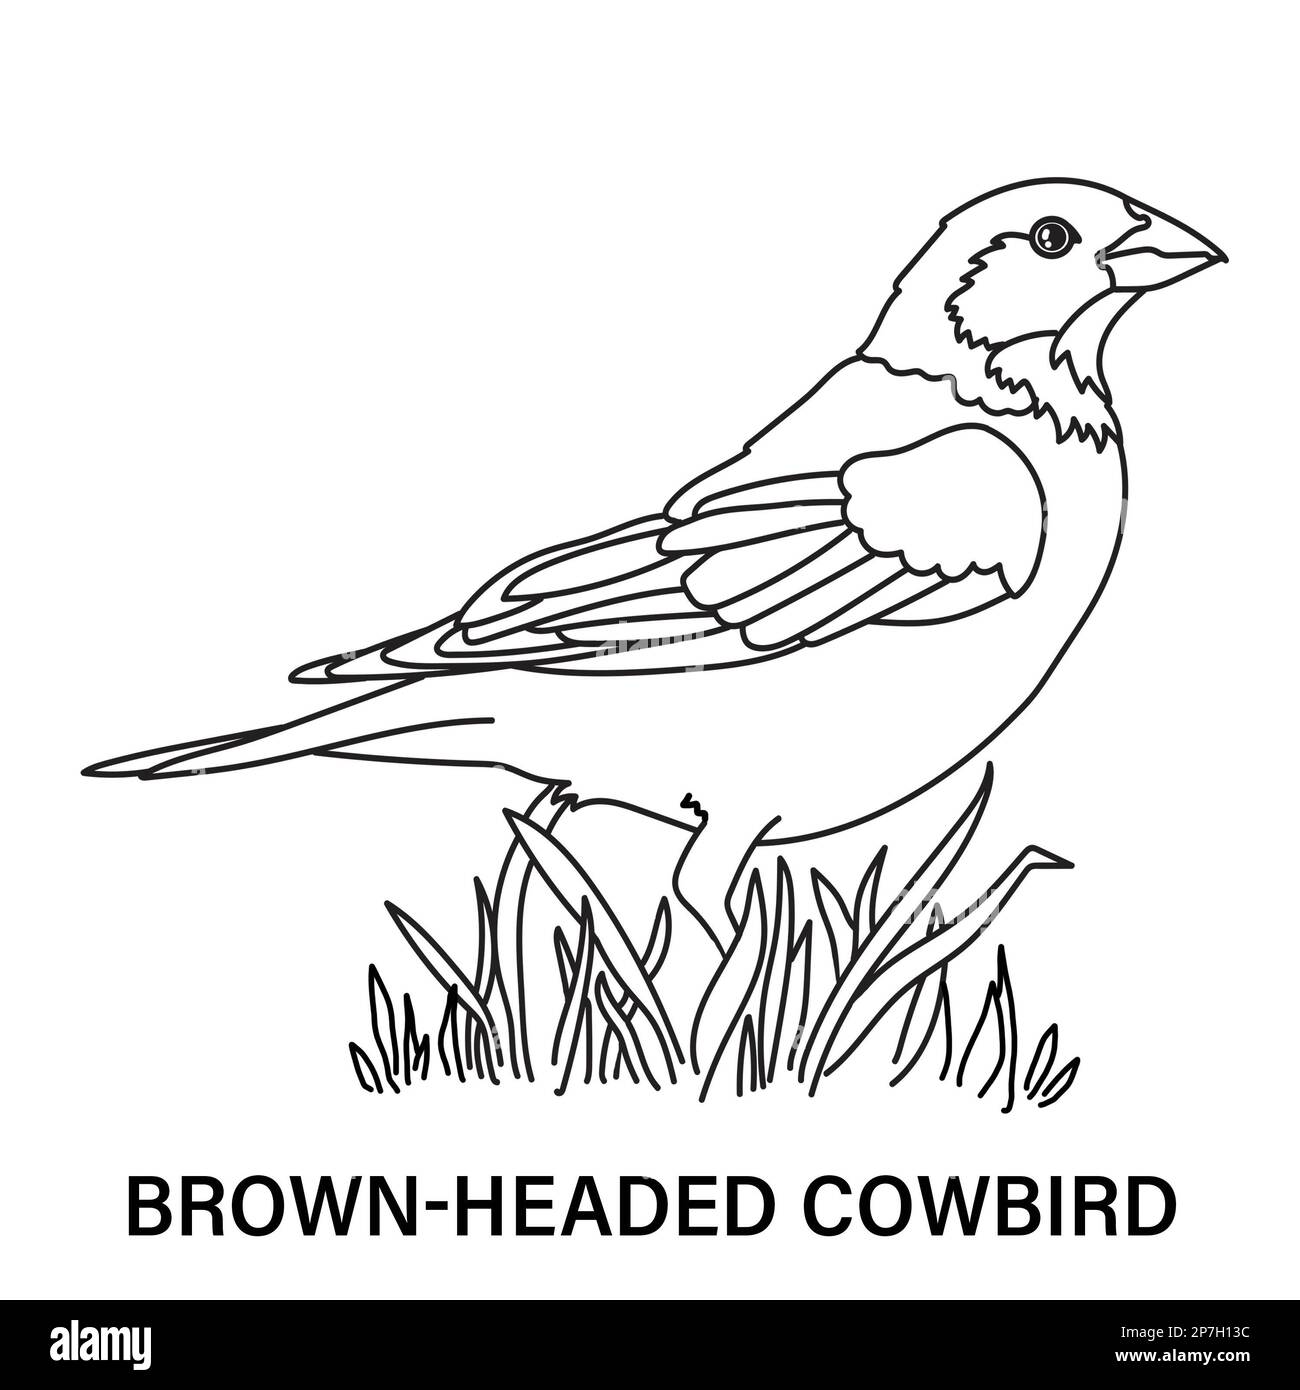 Illustration of a male brown-headed cowbird on a white background. Coloring page for fun or learning. Stock Photo